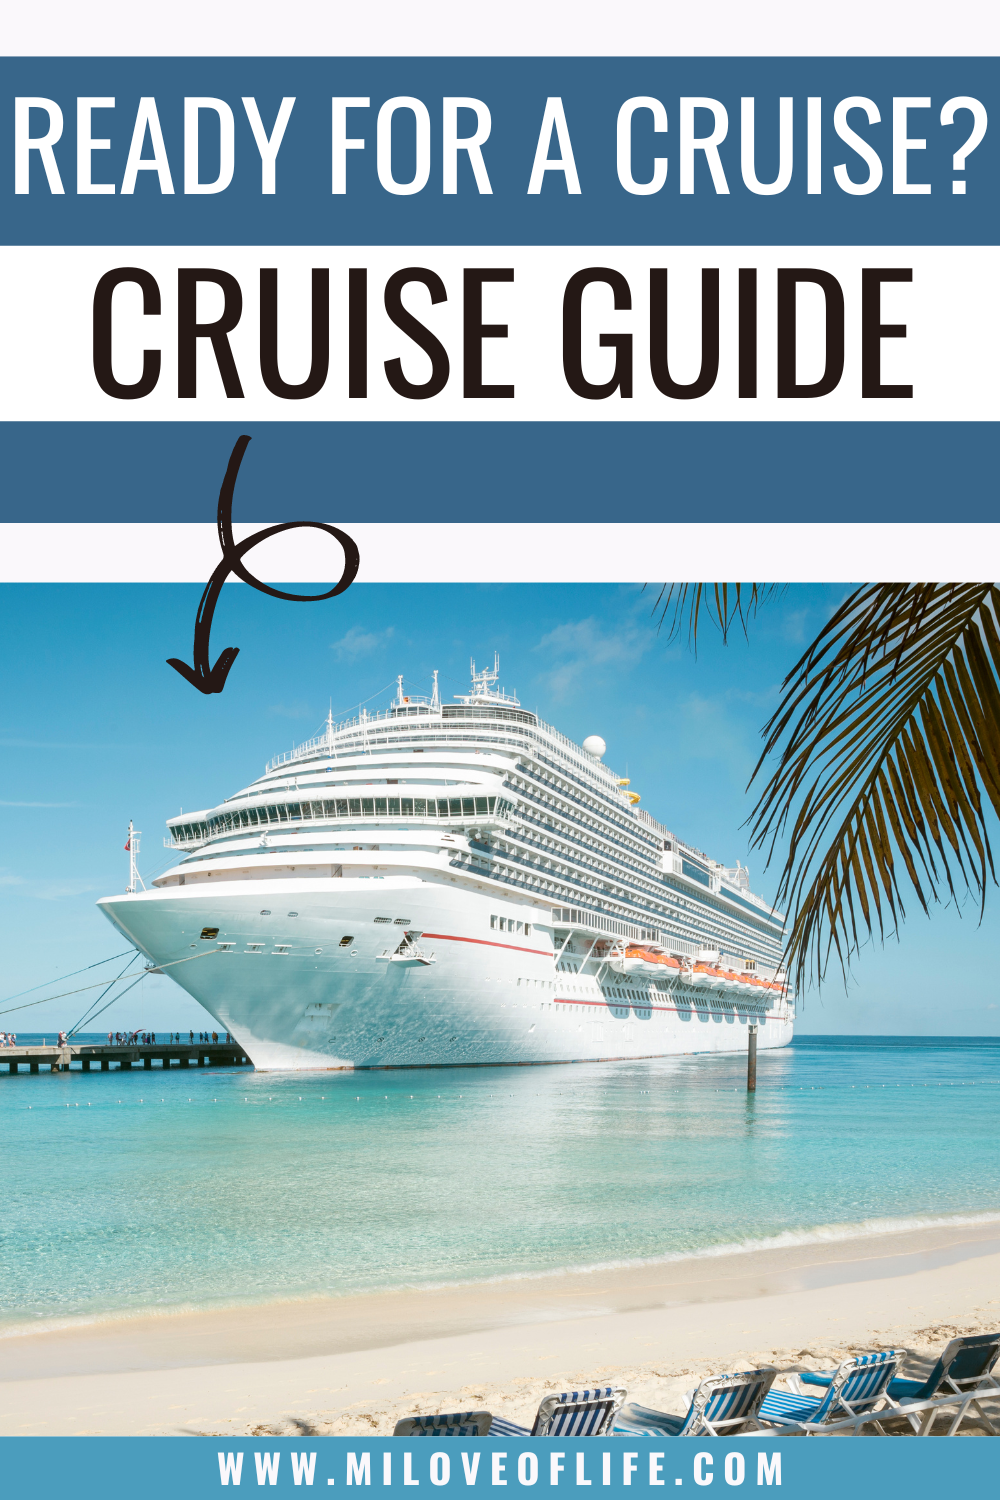 Cruise Guide: Plan a Memorable Anniversary or Birthday Cruise to Mexico